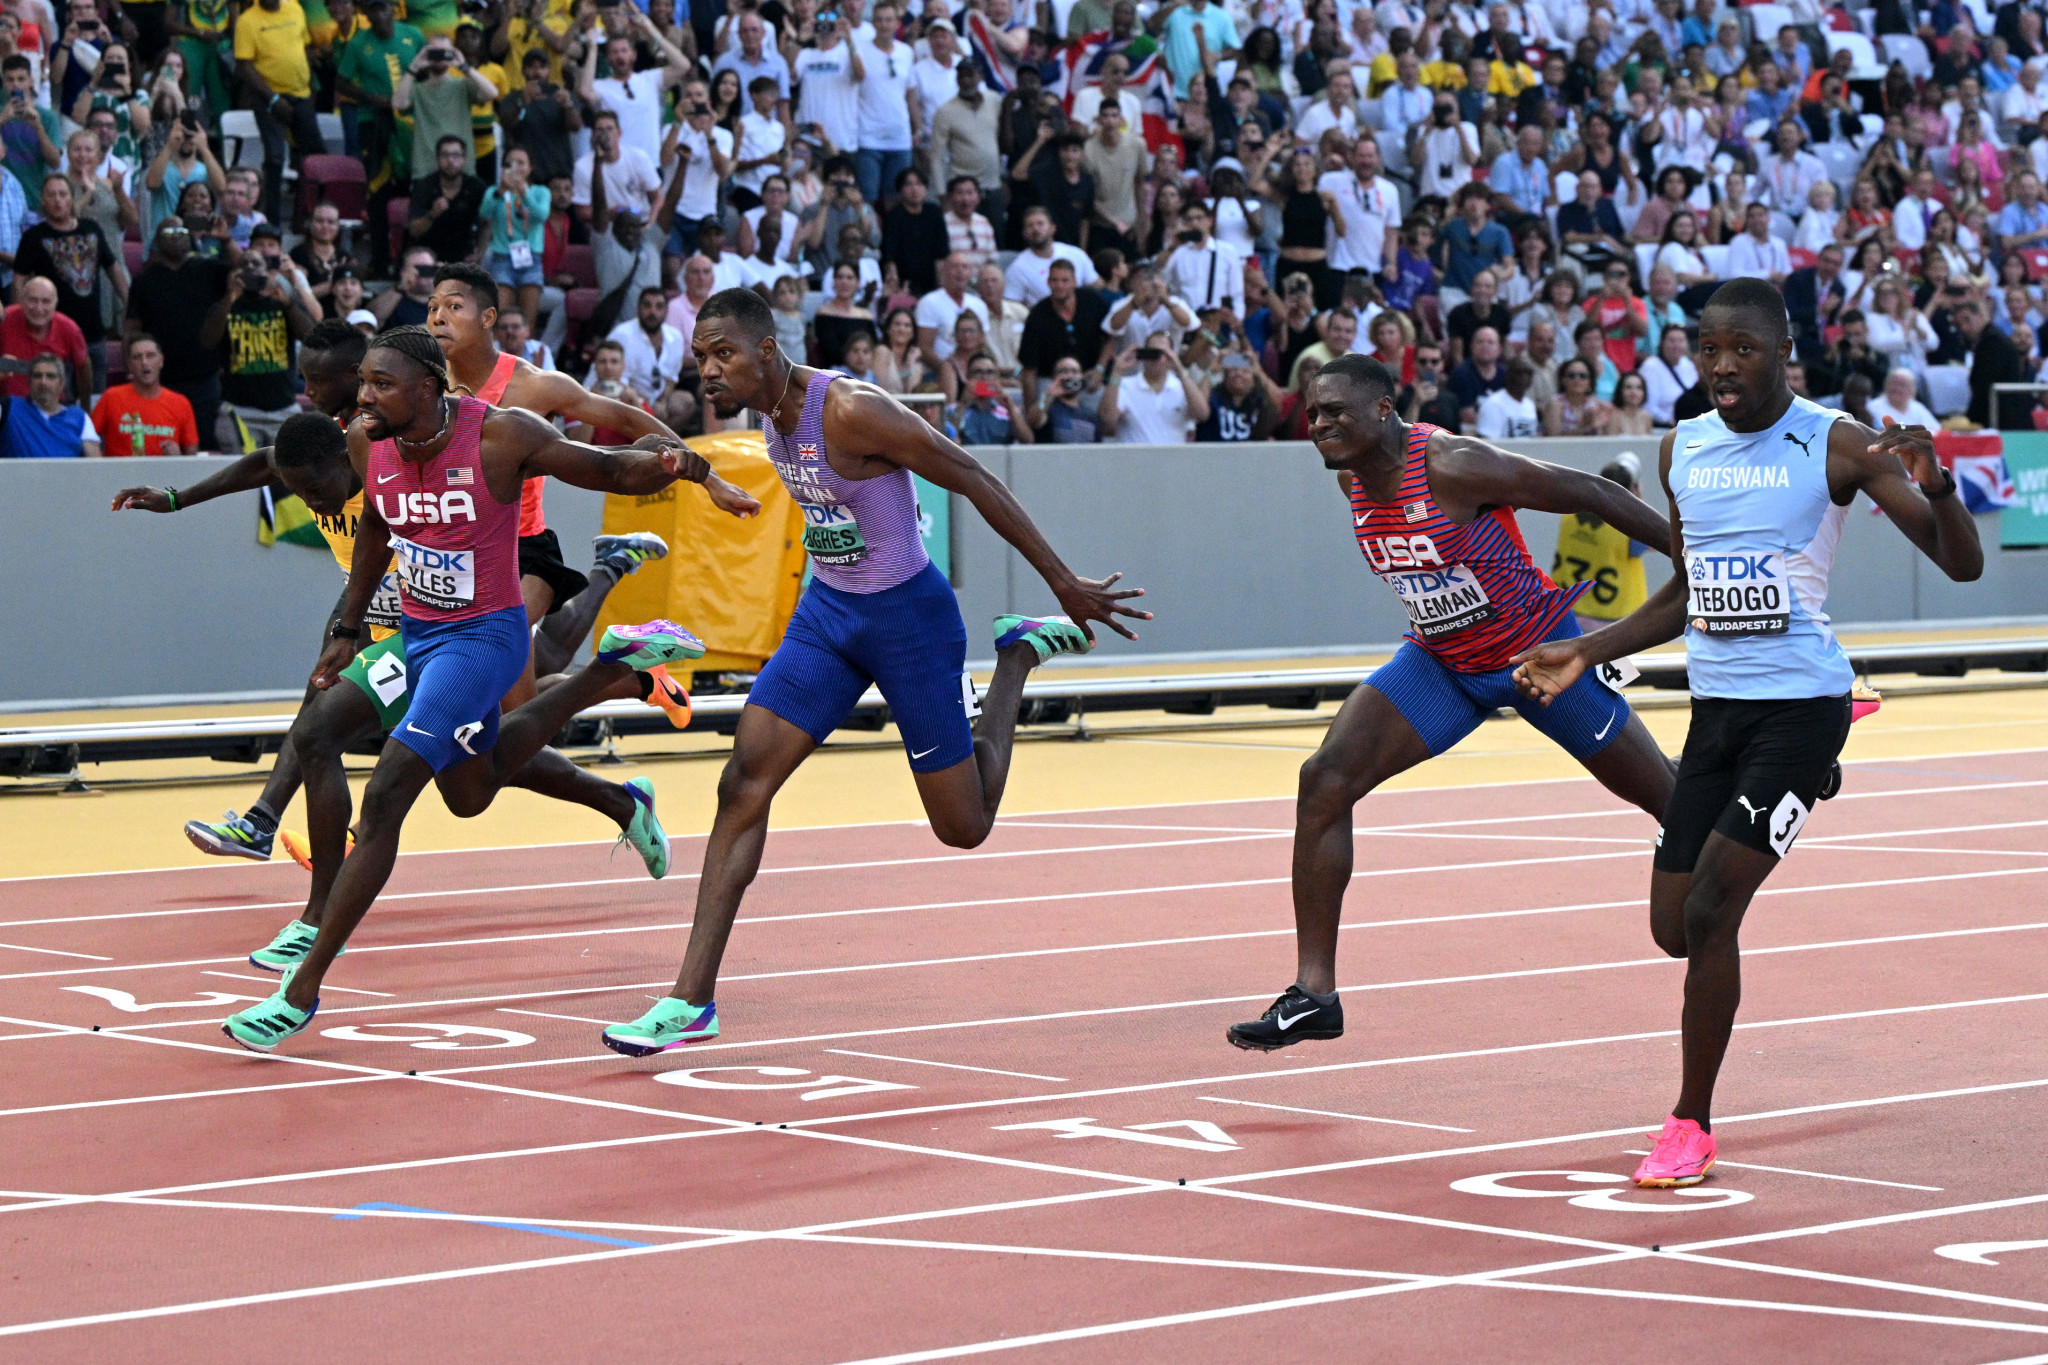 Noah Lyles of the US, third left, won the men's 100m final in 9.83sec, and there was an incredibly tight battle for second and third in which Botswana's Letsile Tebogo, right, took silver and Britain's Zharnel Hughes, third right, bronze ©Getty Images